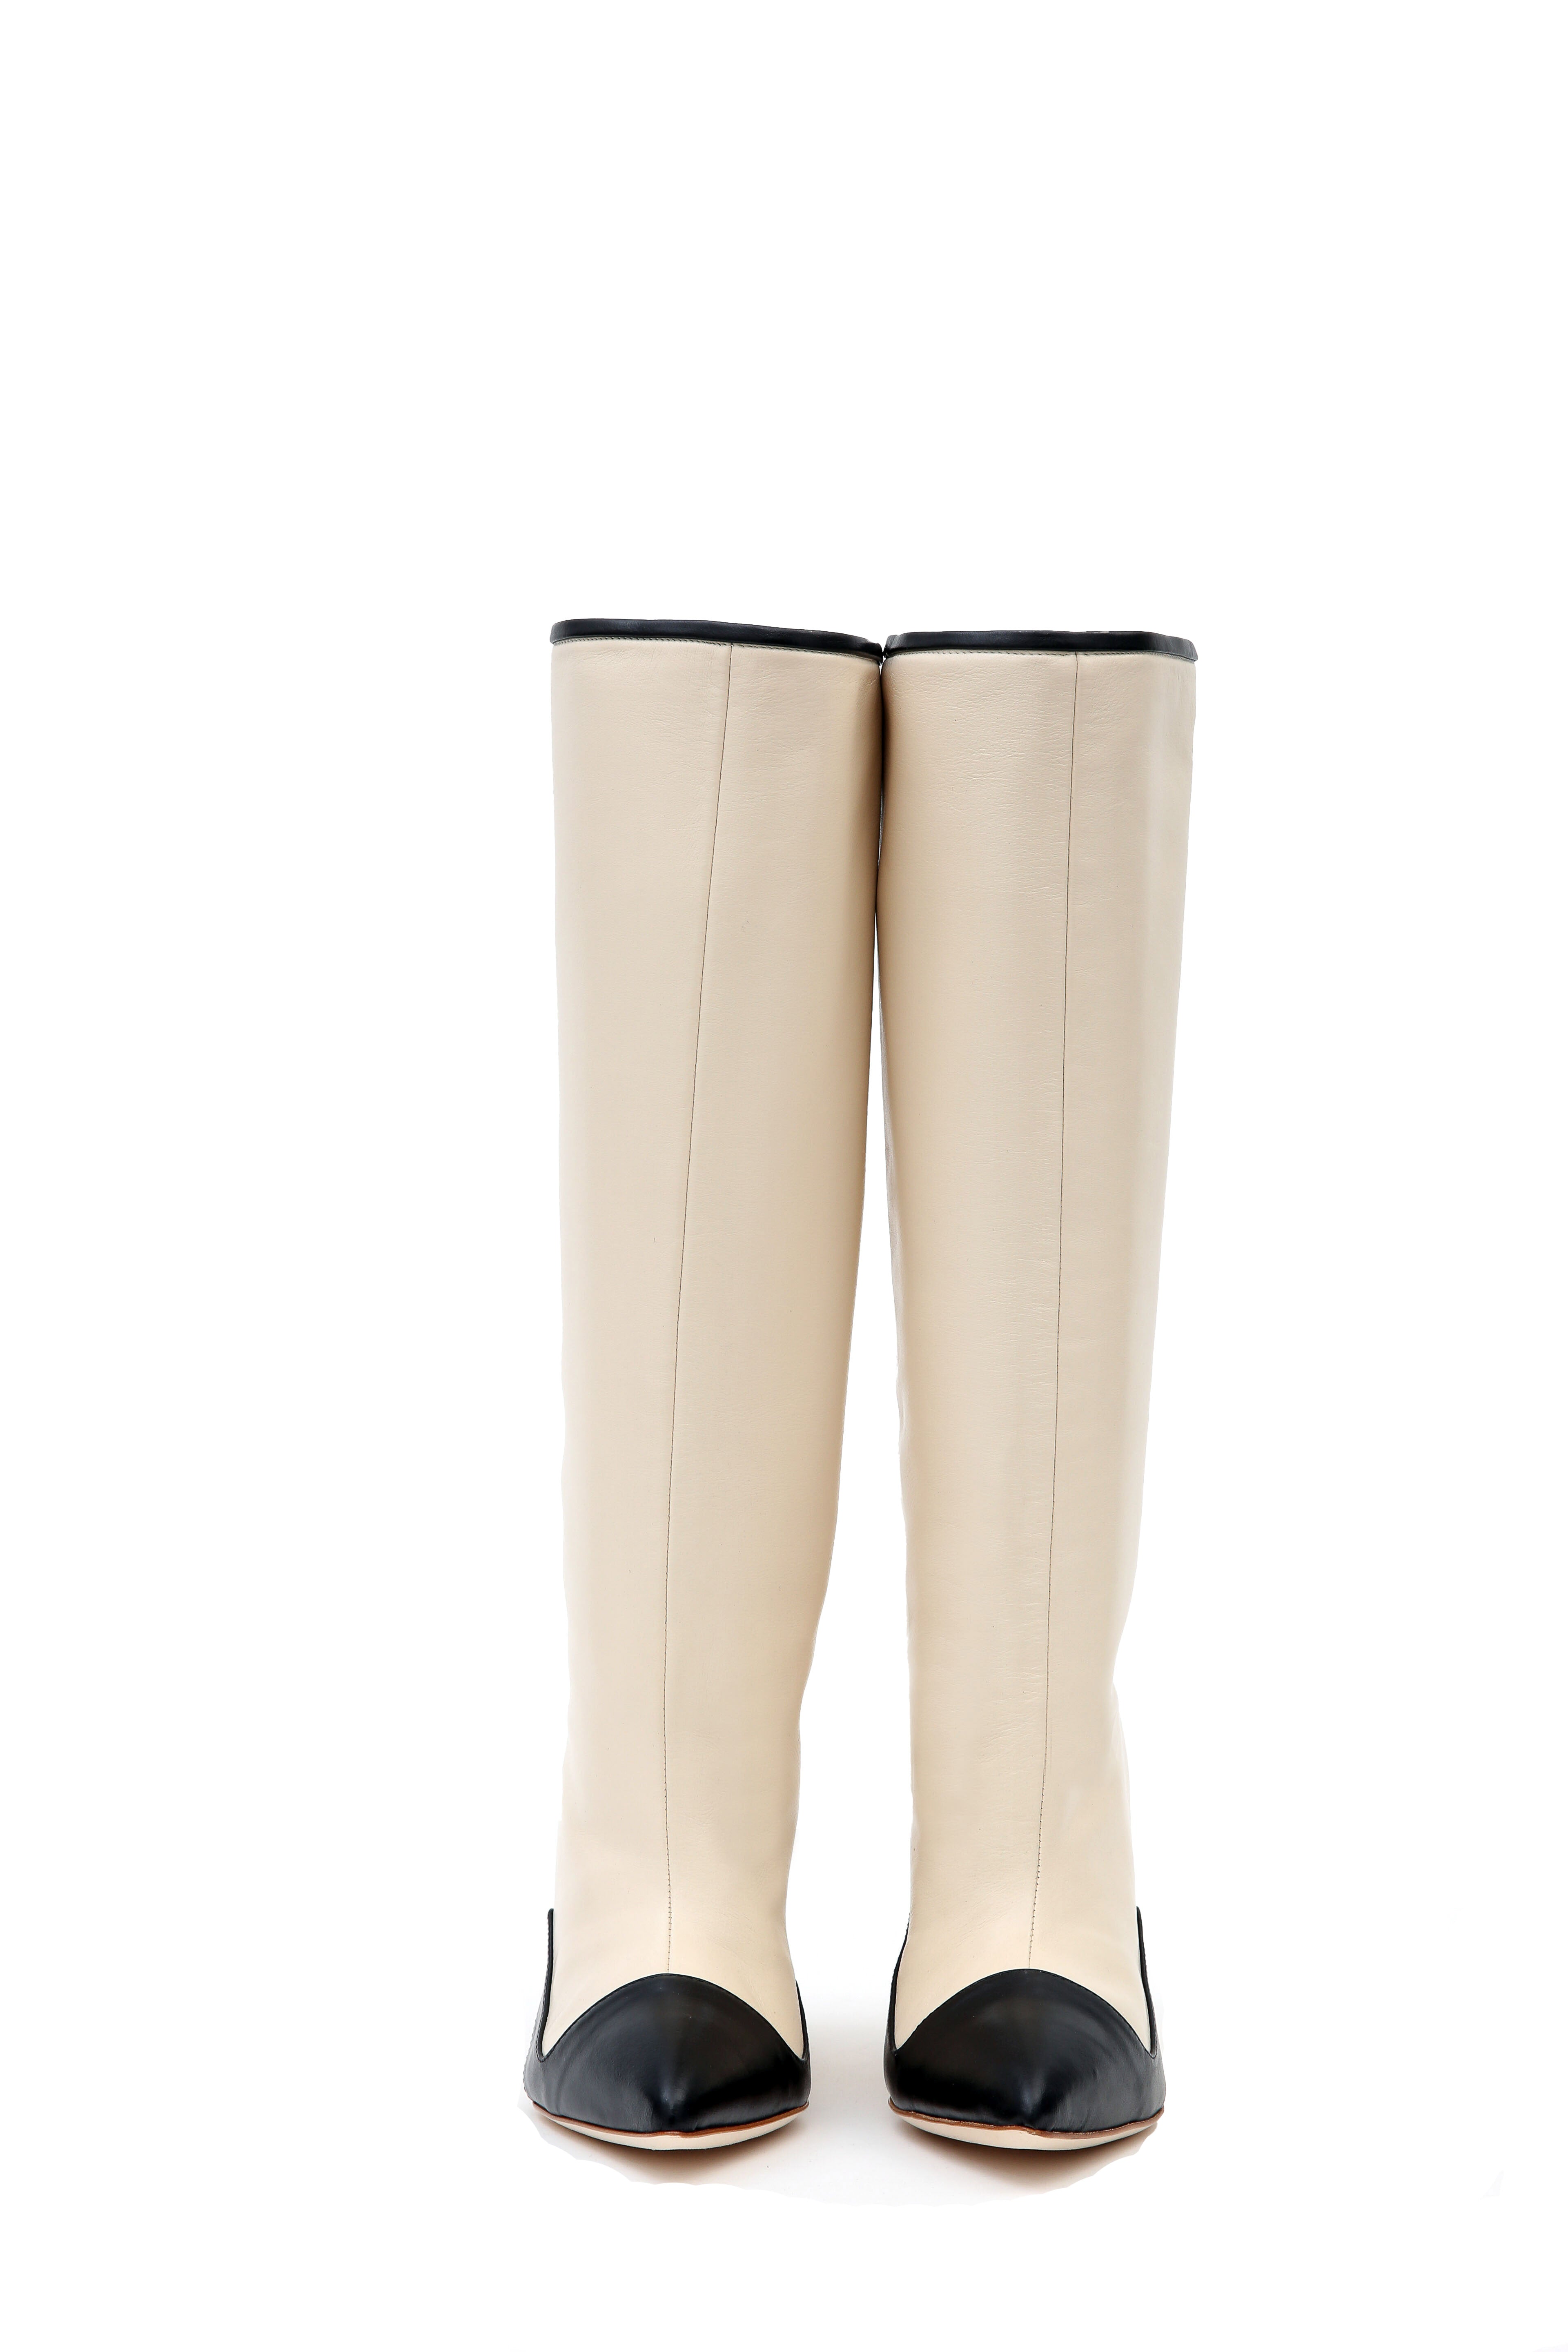 Candy Buttercup Cream and Black Calfskin Pull-on Boots